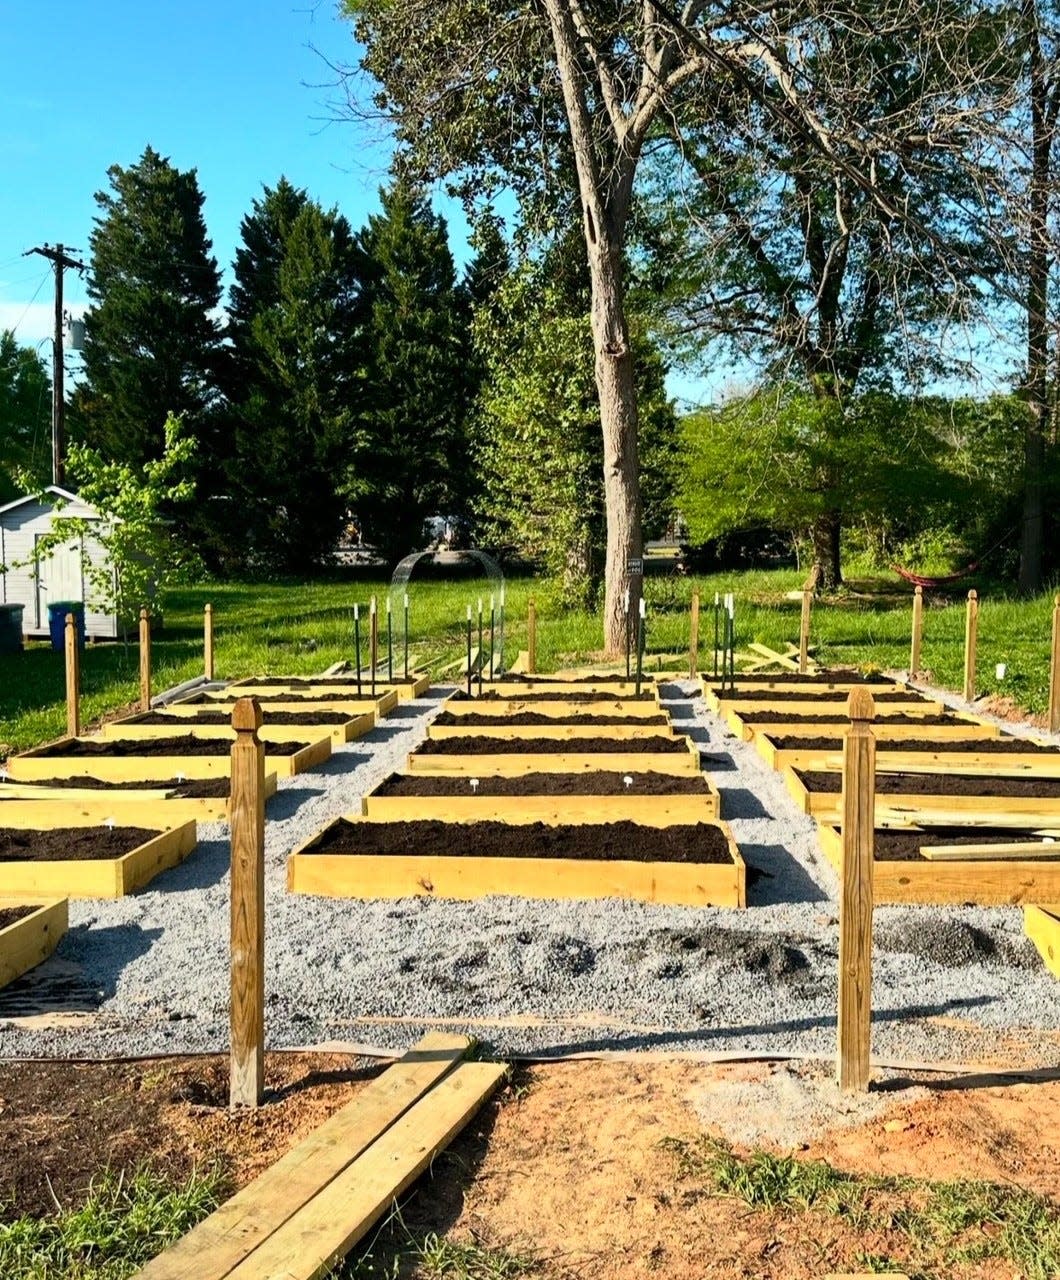 The Giving Garden, located at 310 Todd St. in Belmont, in its beginning stages.